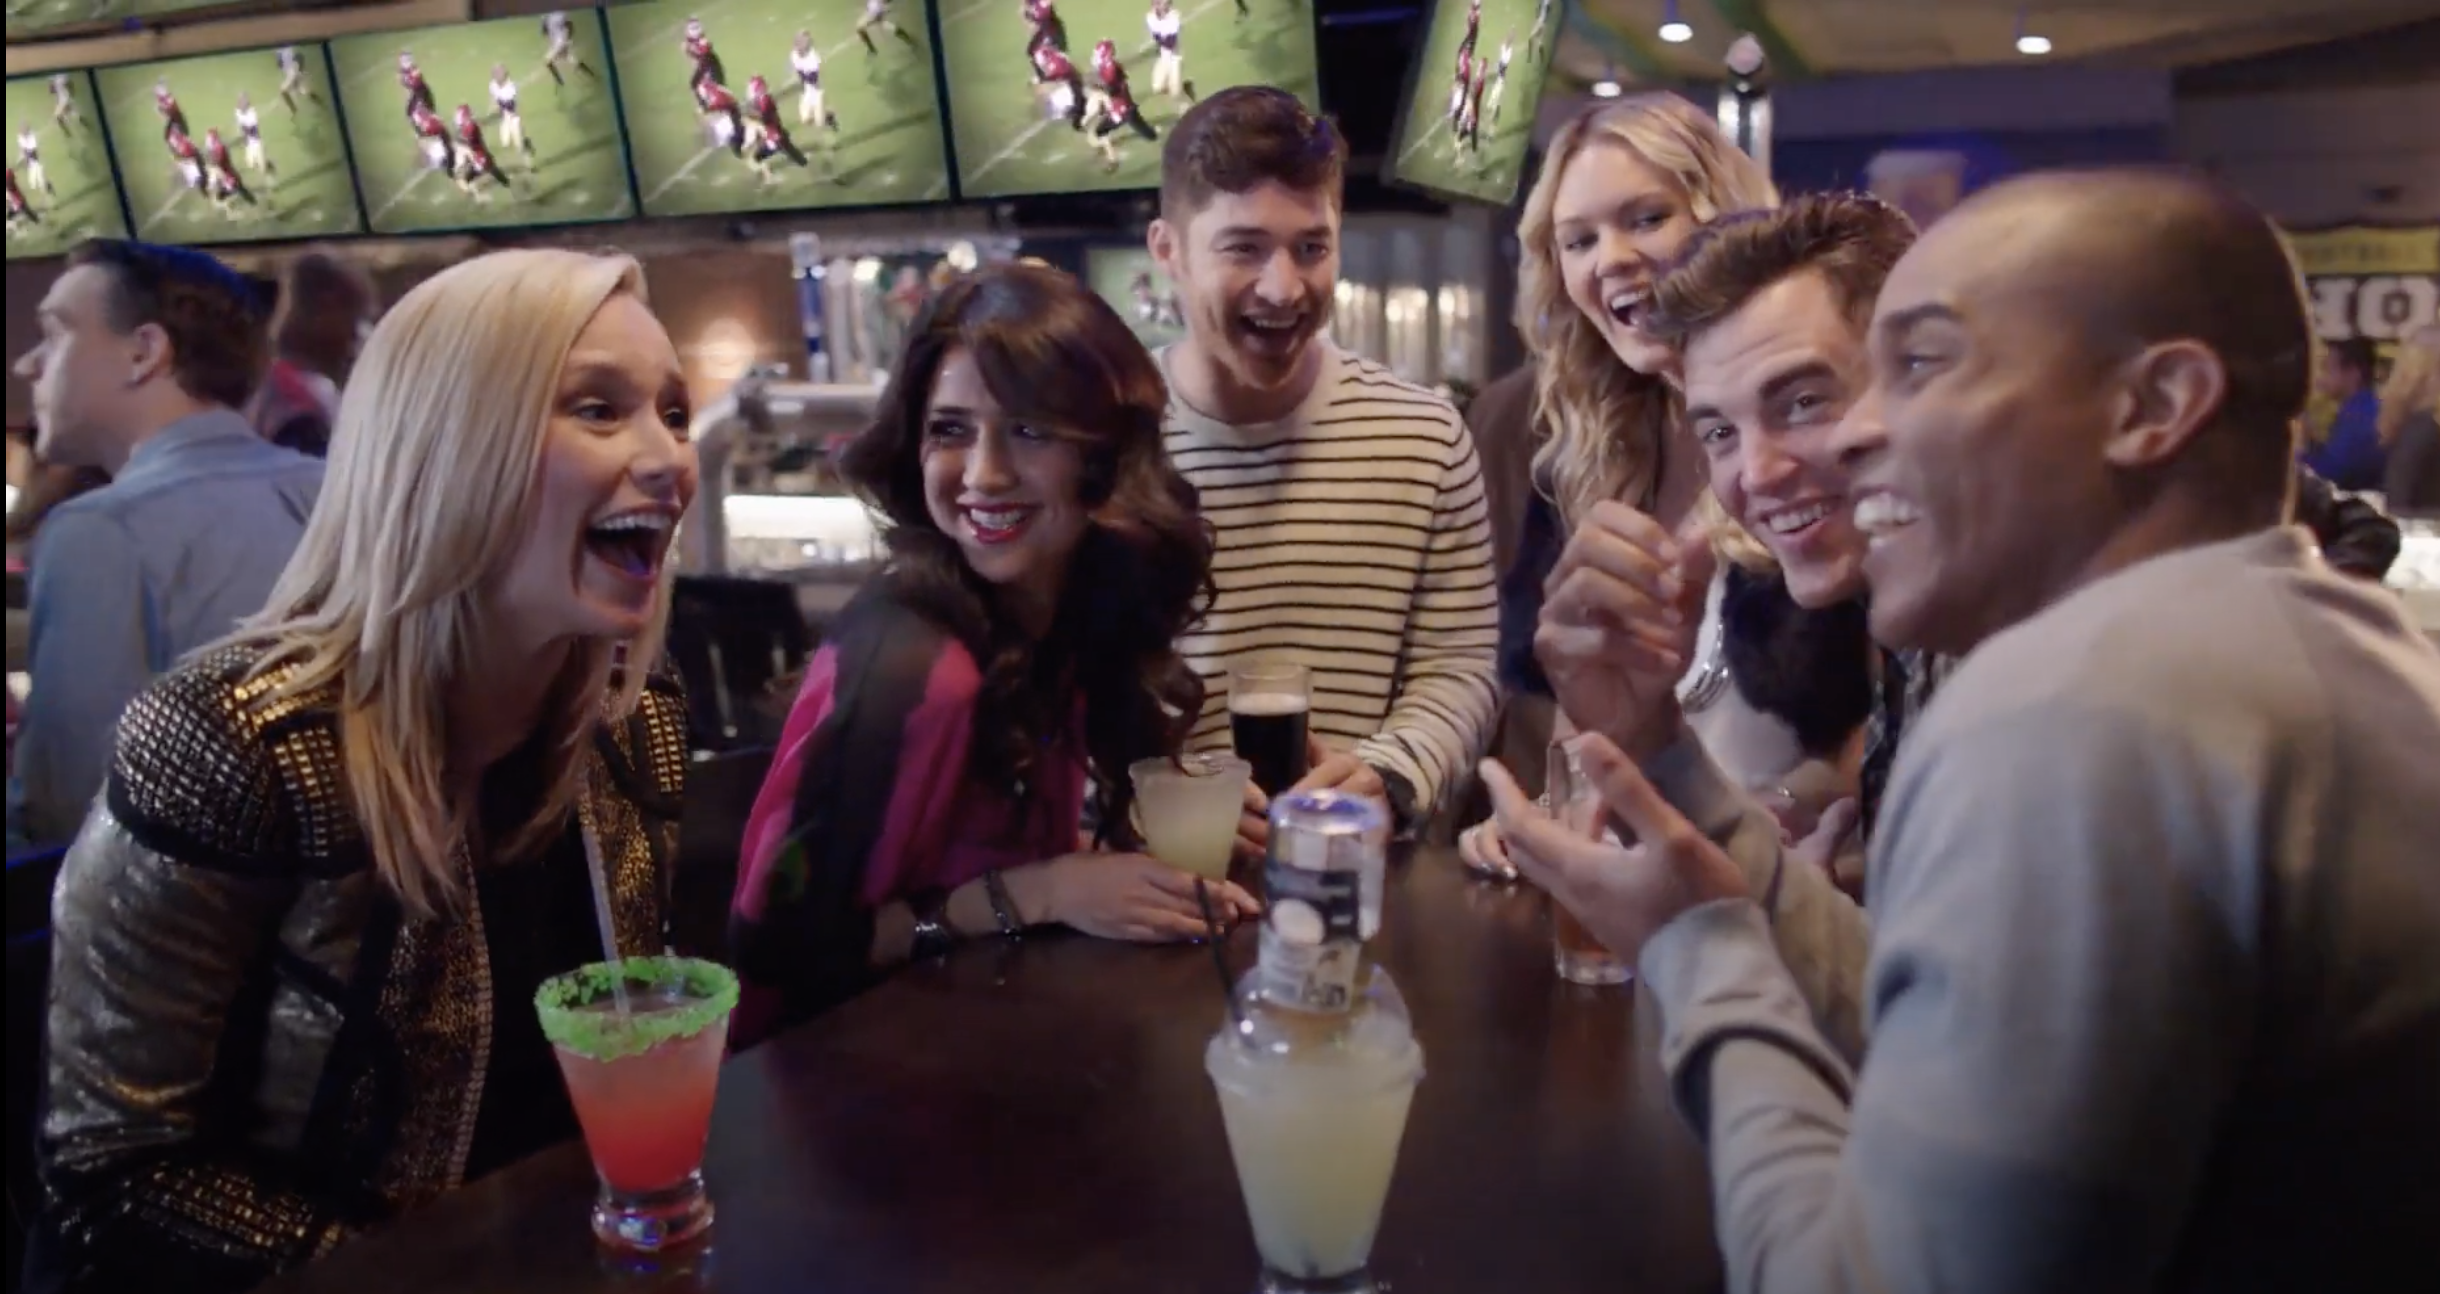 A group of friends smile and laugh in a bar with football on the TVs in the background